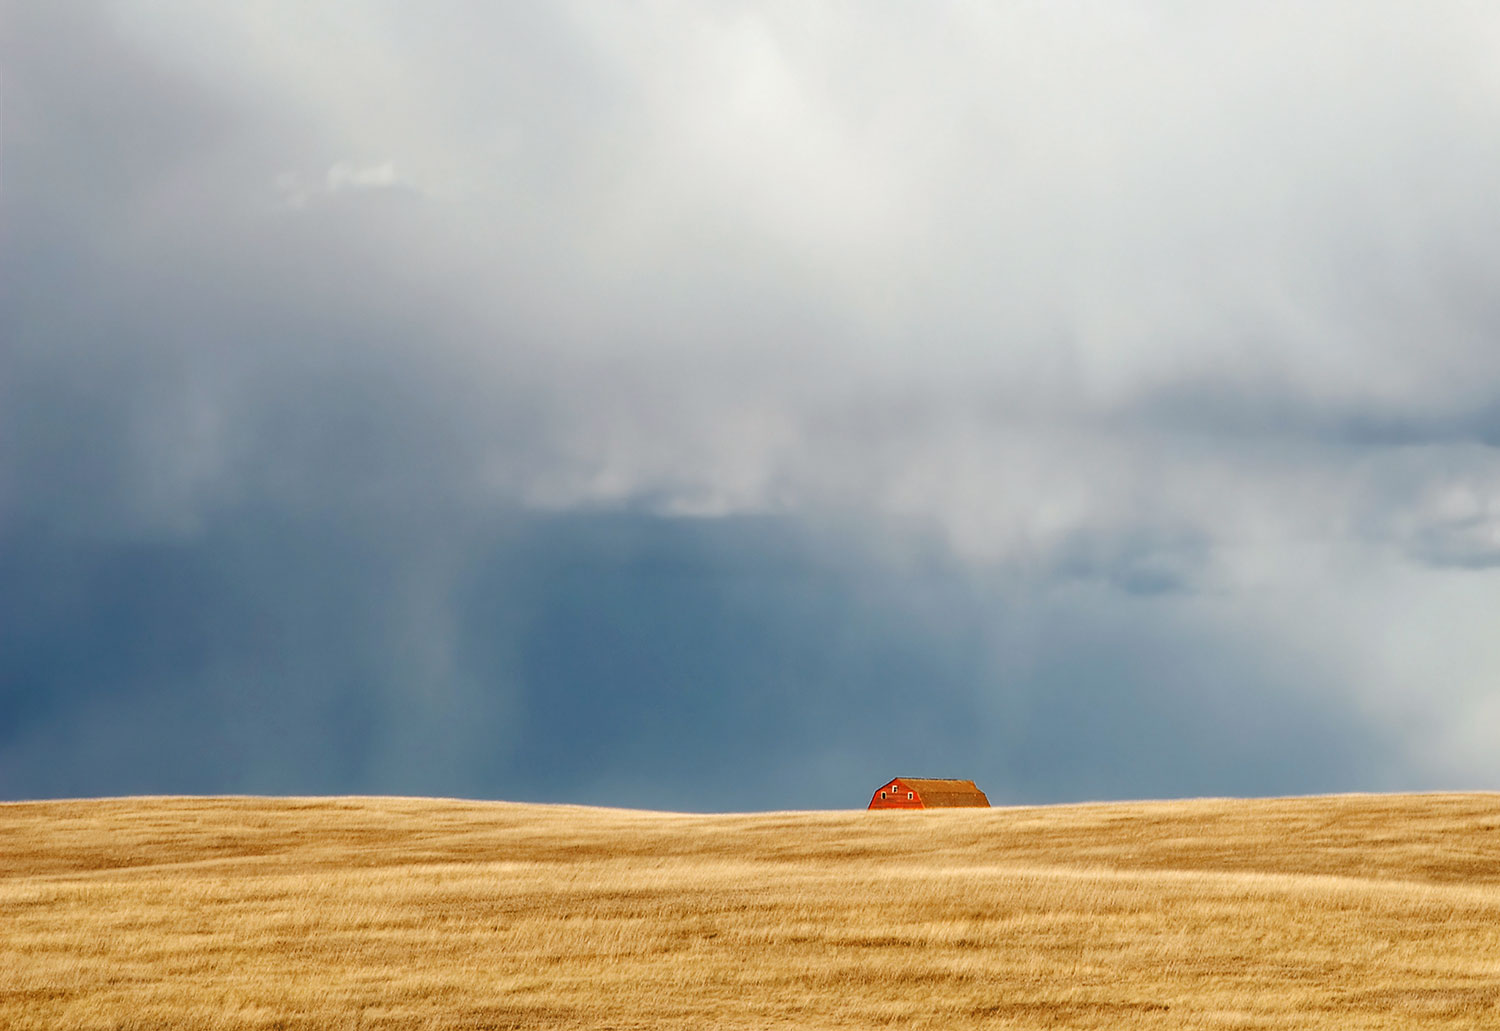 A storm looms large over the horizon somewhere on the plains of South Dakota.&nbsp;→ Buy a Print